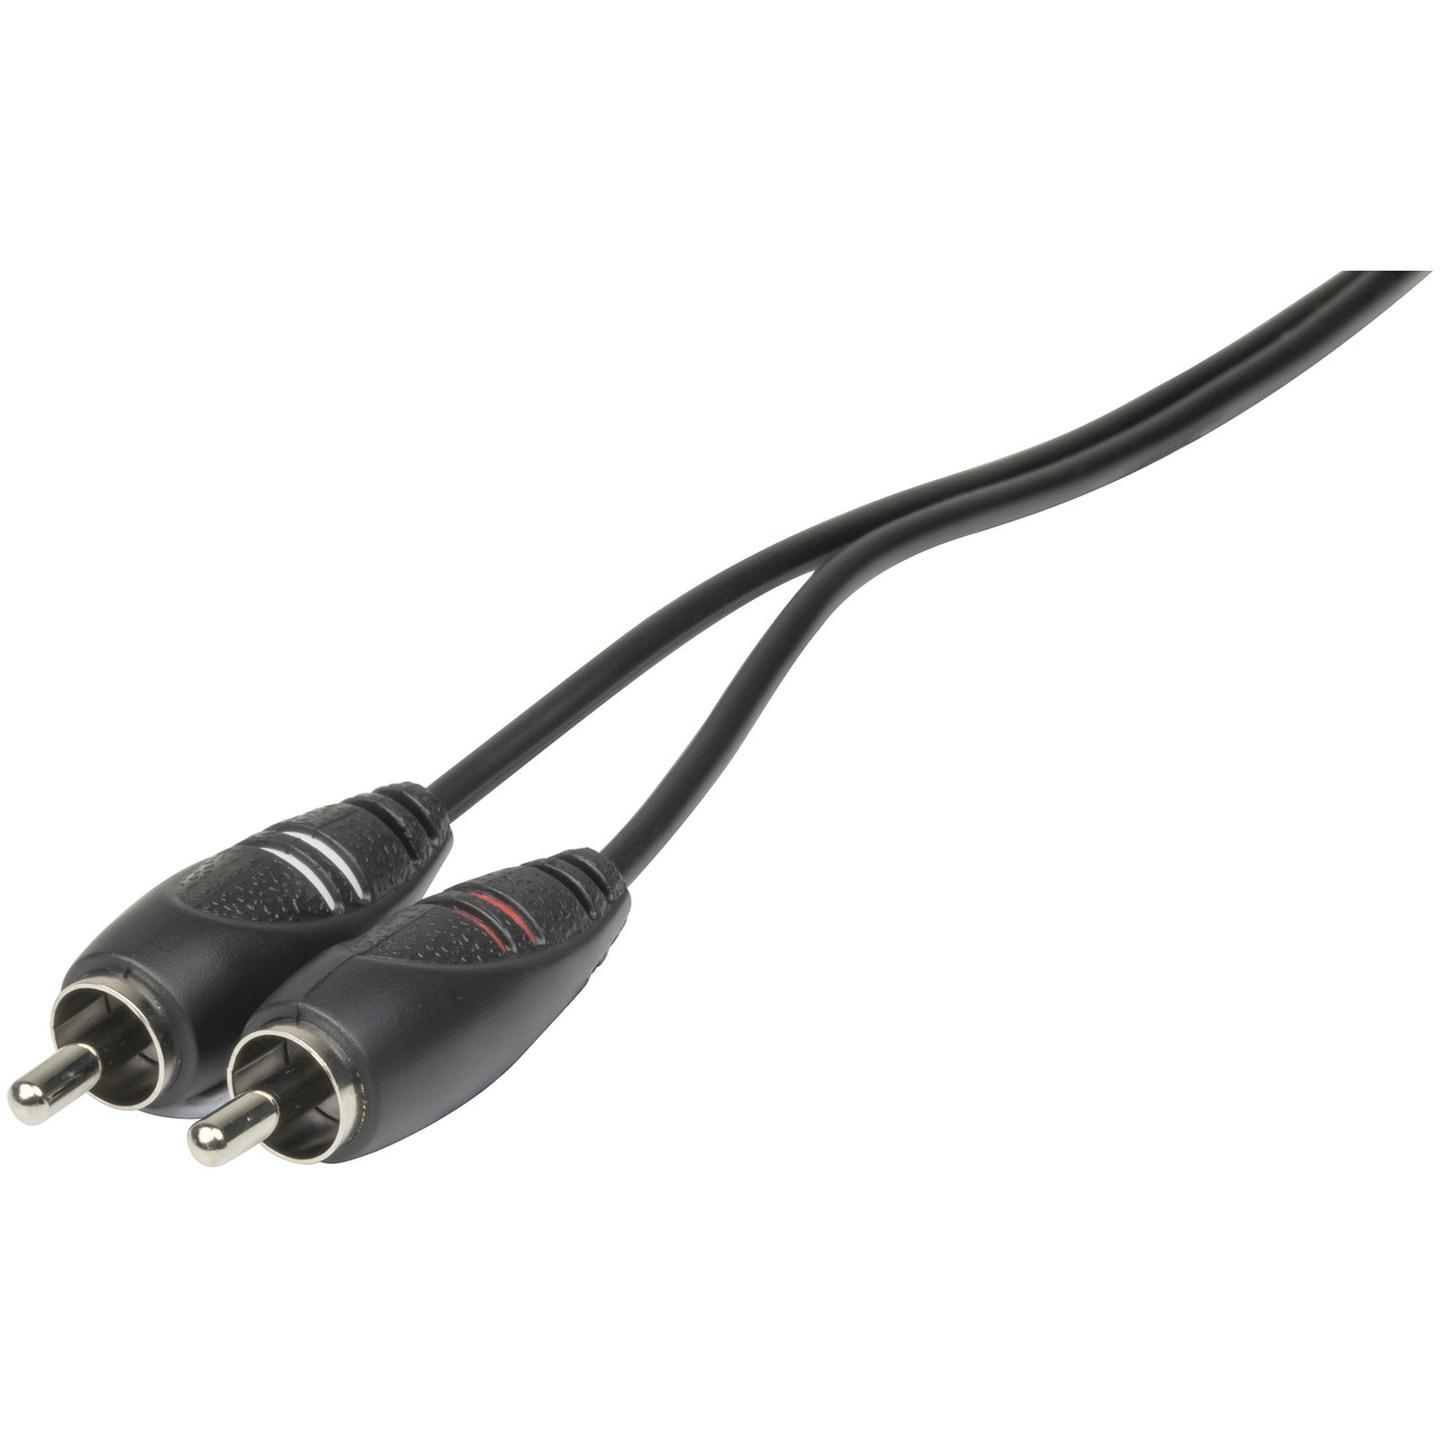 3.5mm Stereo Plug to 2 x RCA Plugs Audio Cable - 1.5m